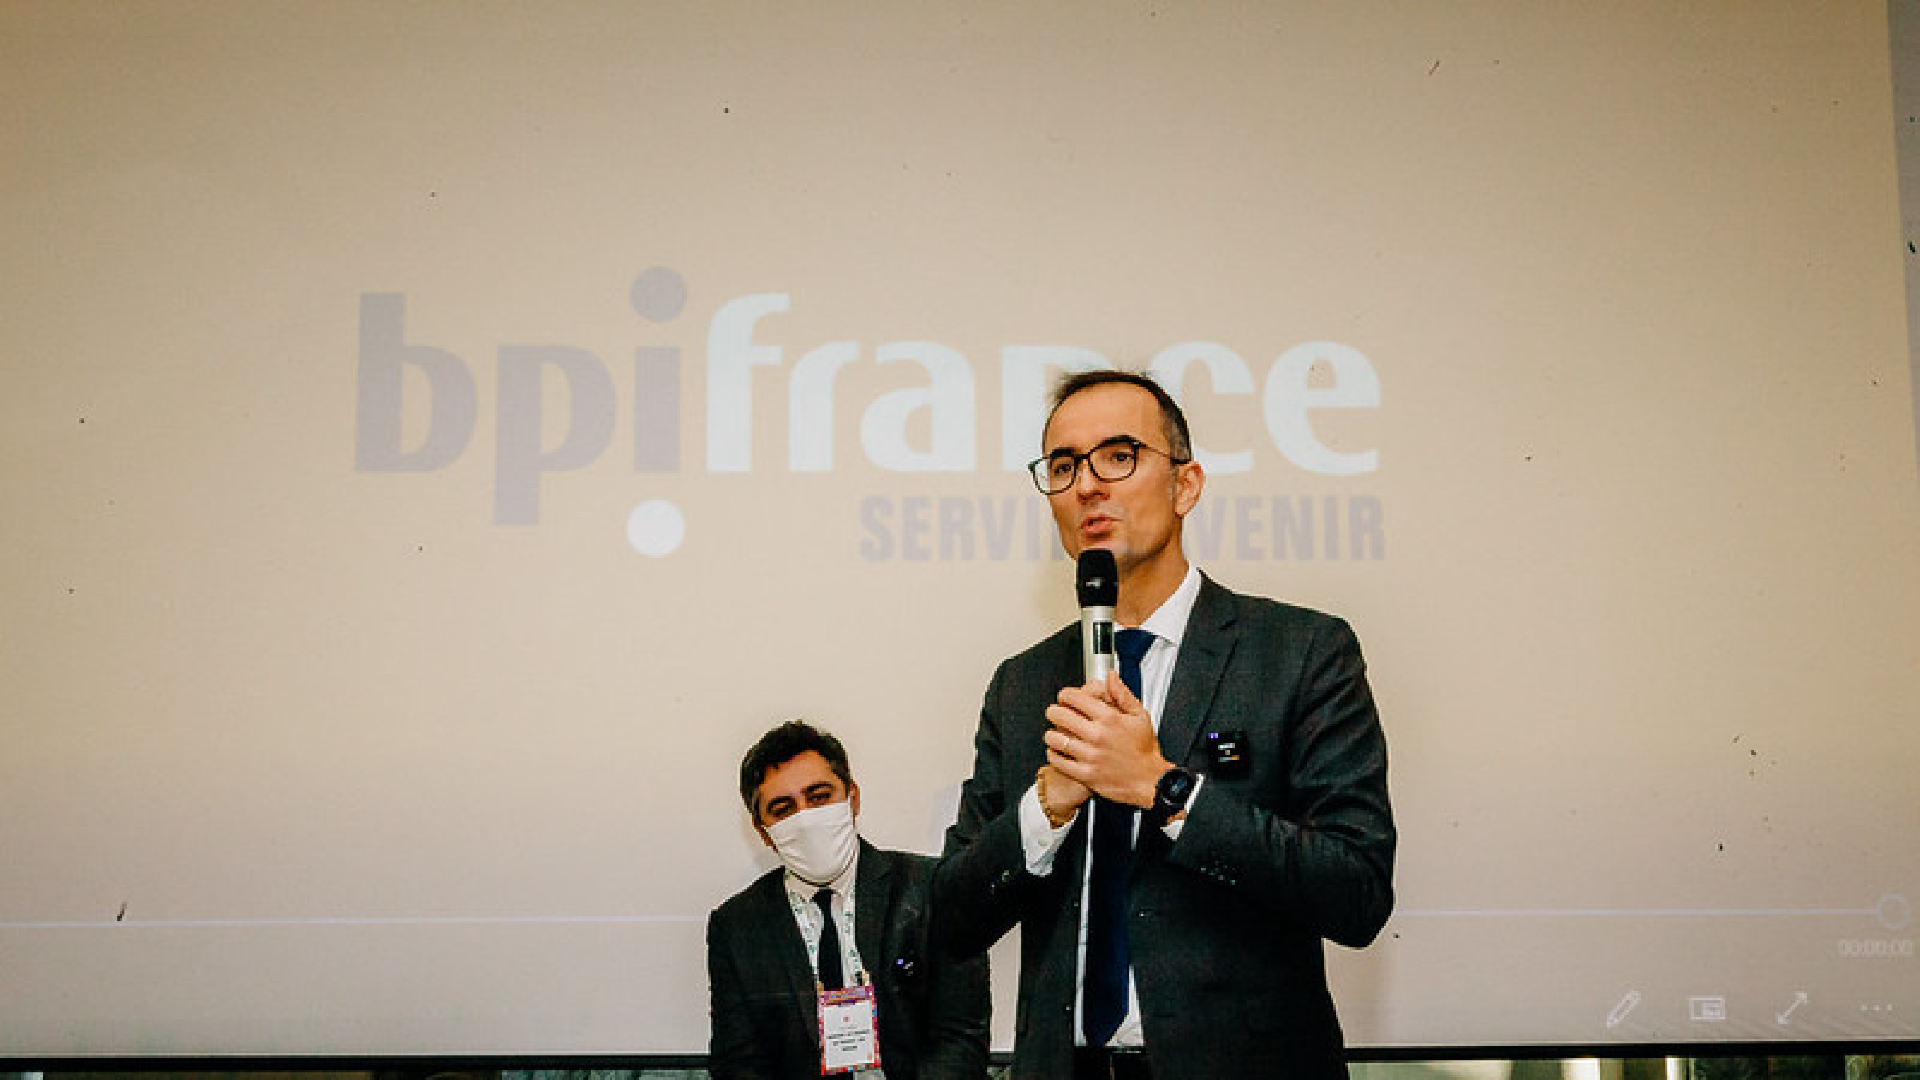 Keynote: The latest from Bpifrance